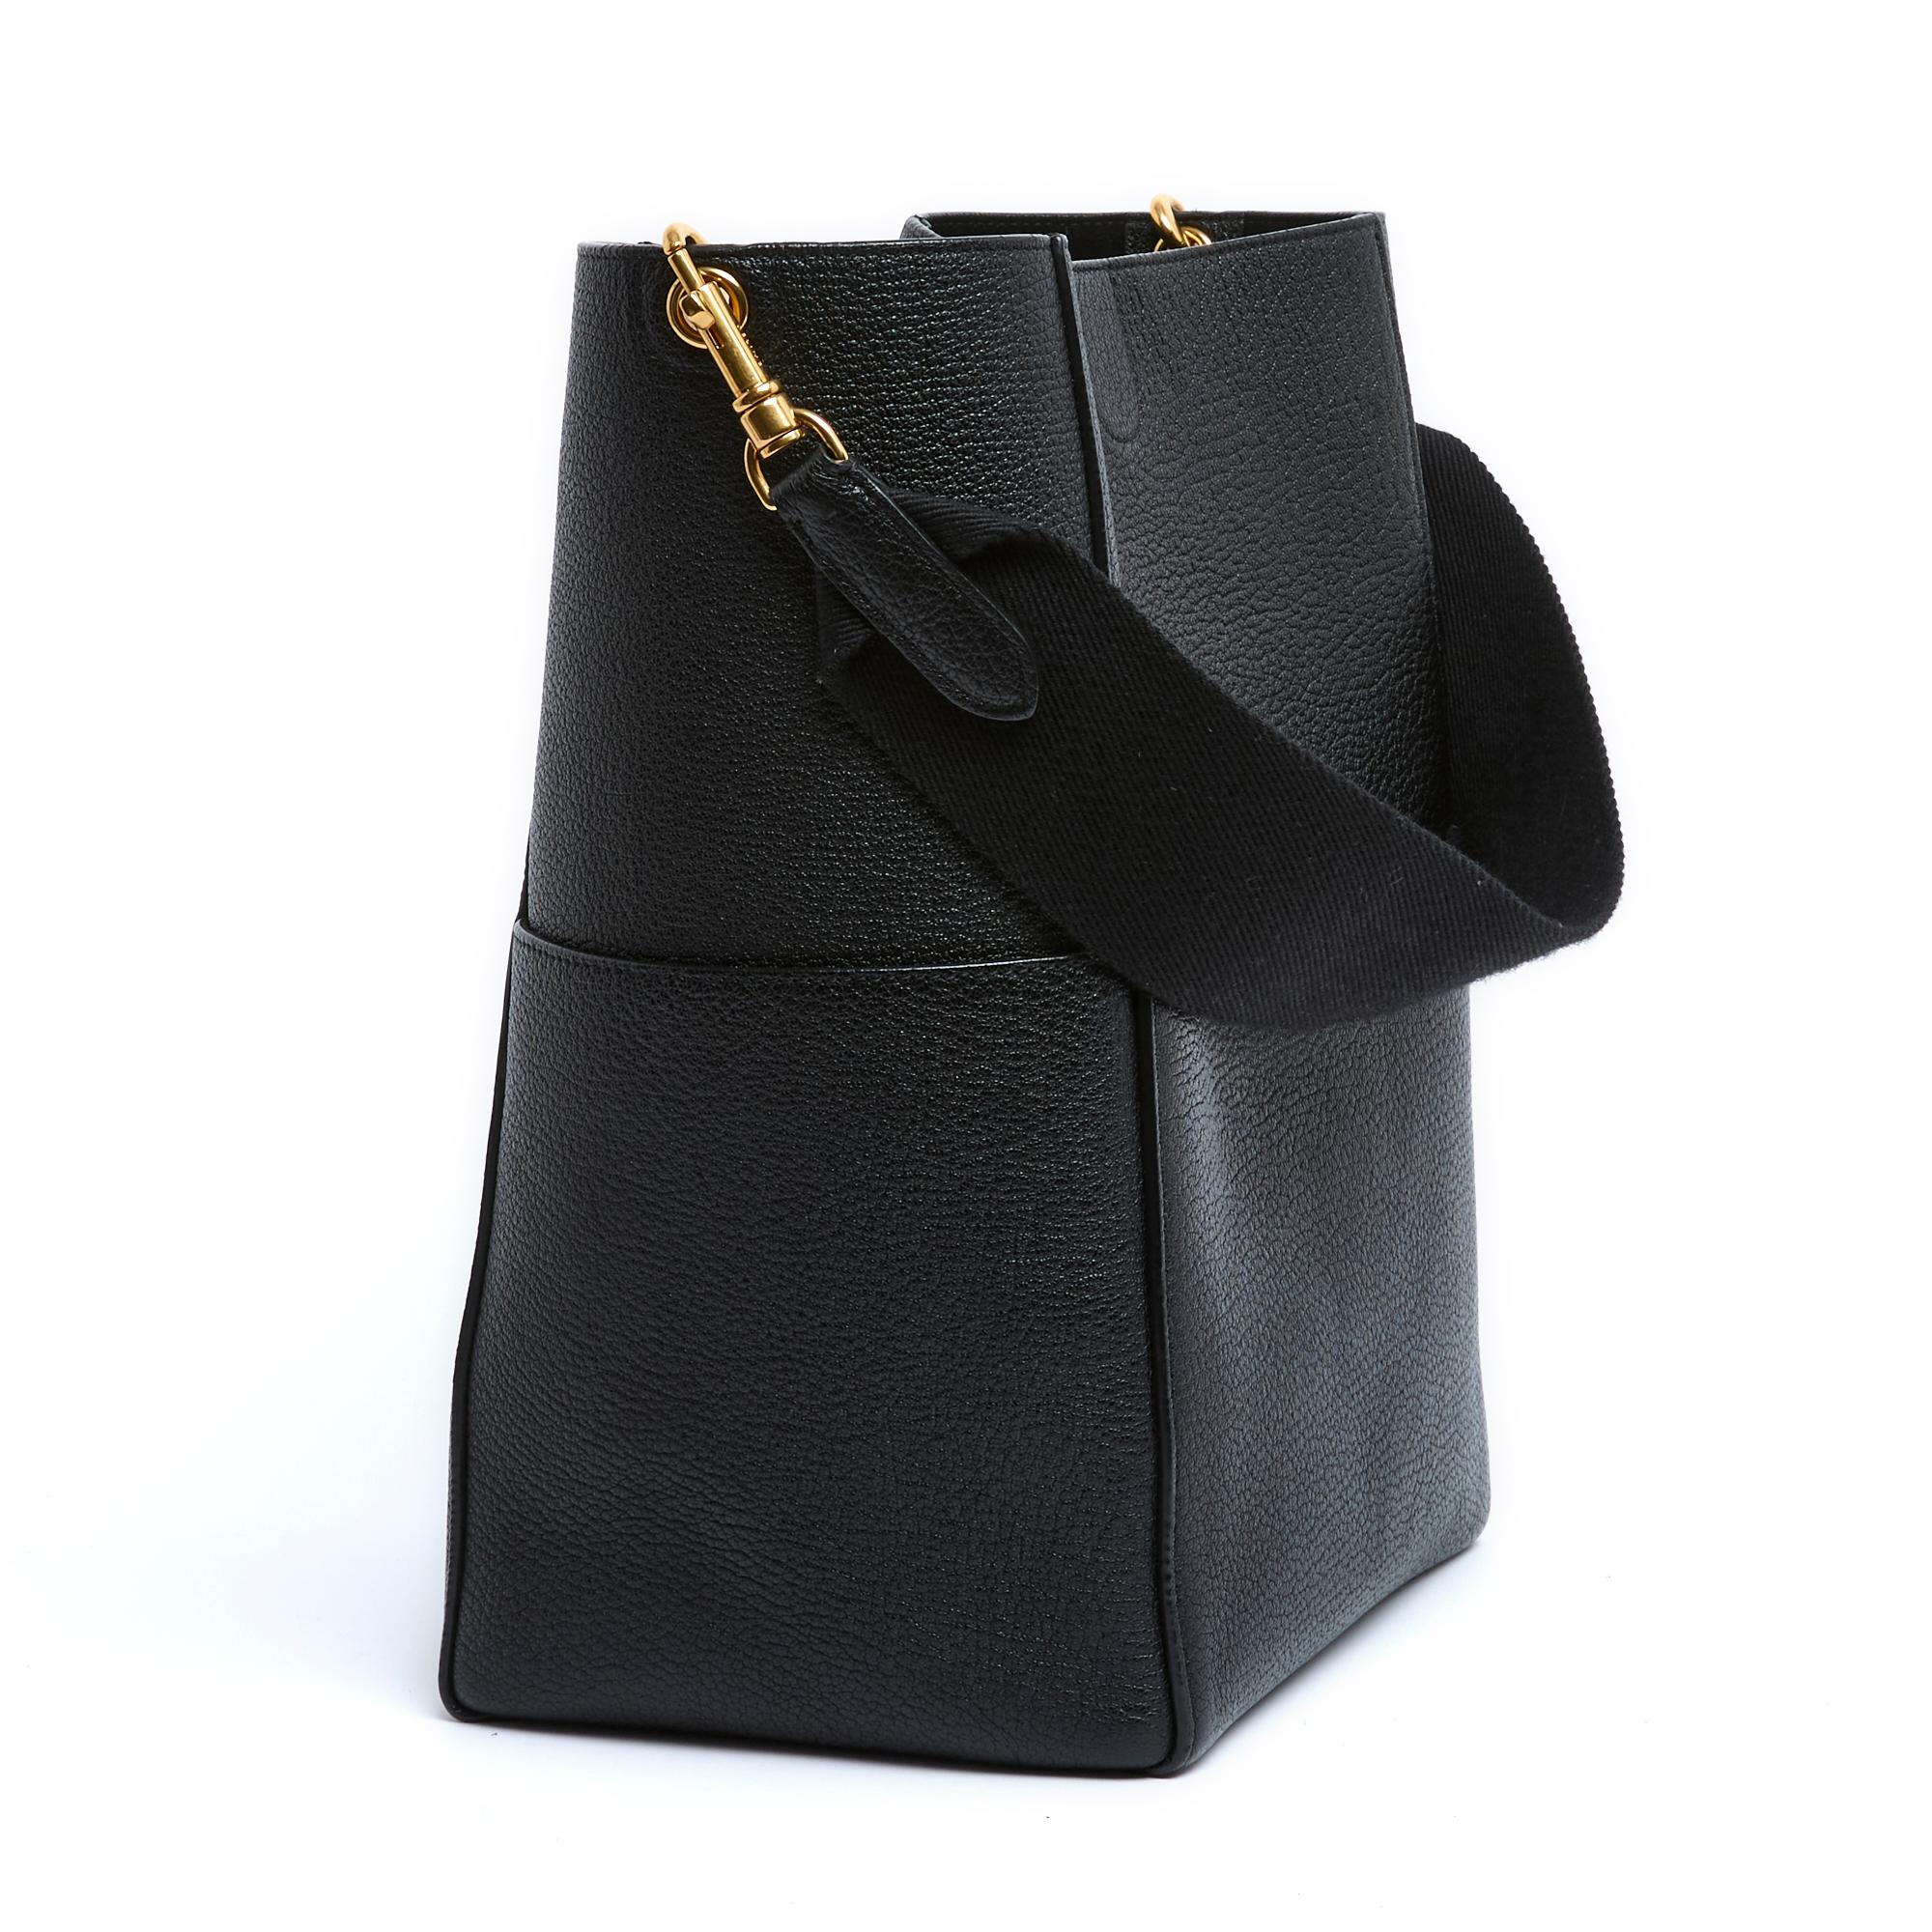 Céline Seau Sangle model bag by Phoebe Philo in black grained leather, unlined, one large front pocket, removable shoulder strap in webbing and matching leather. Width 23 cm x height 32.5 cm x depth 16.5 cm, shoulder strap 60 cm. The bag took a